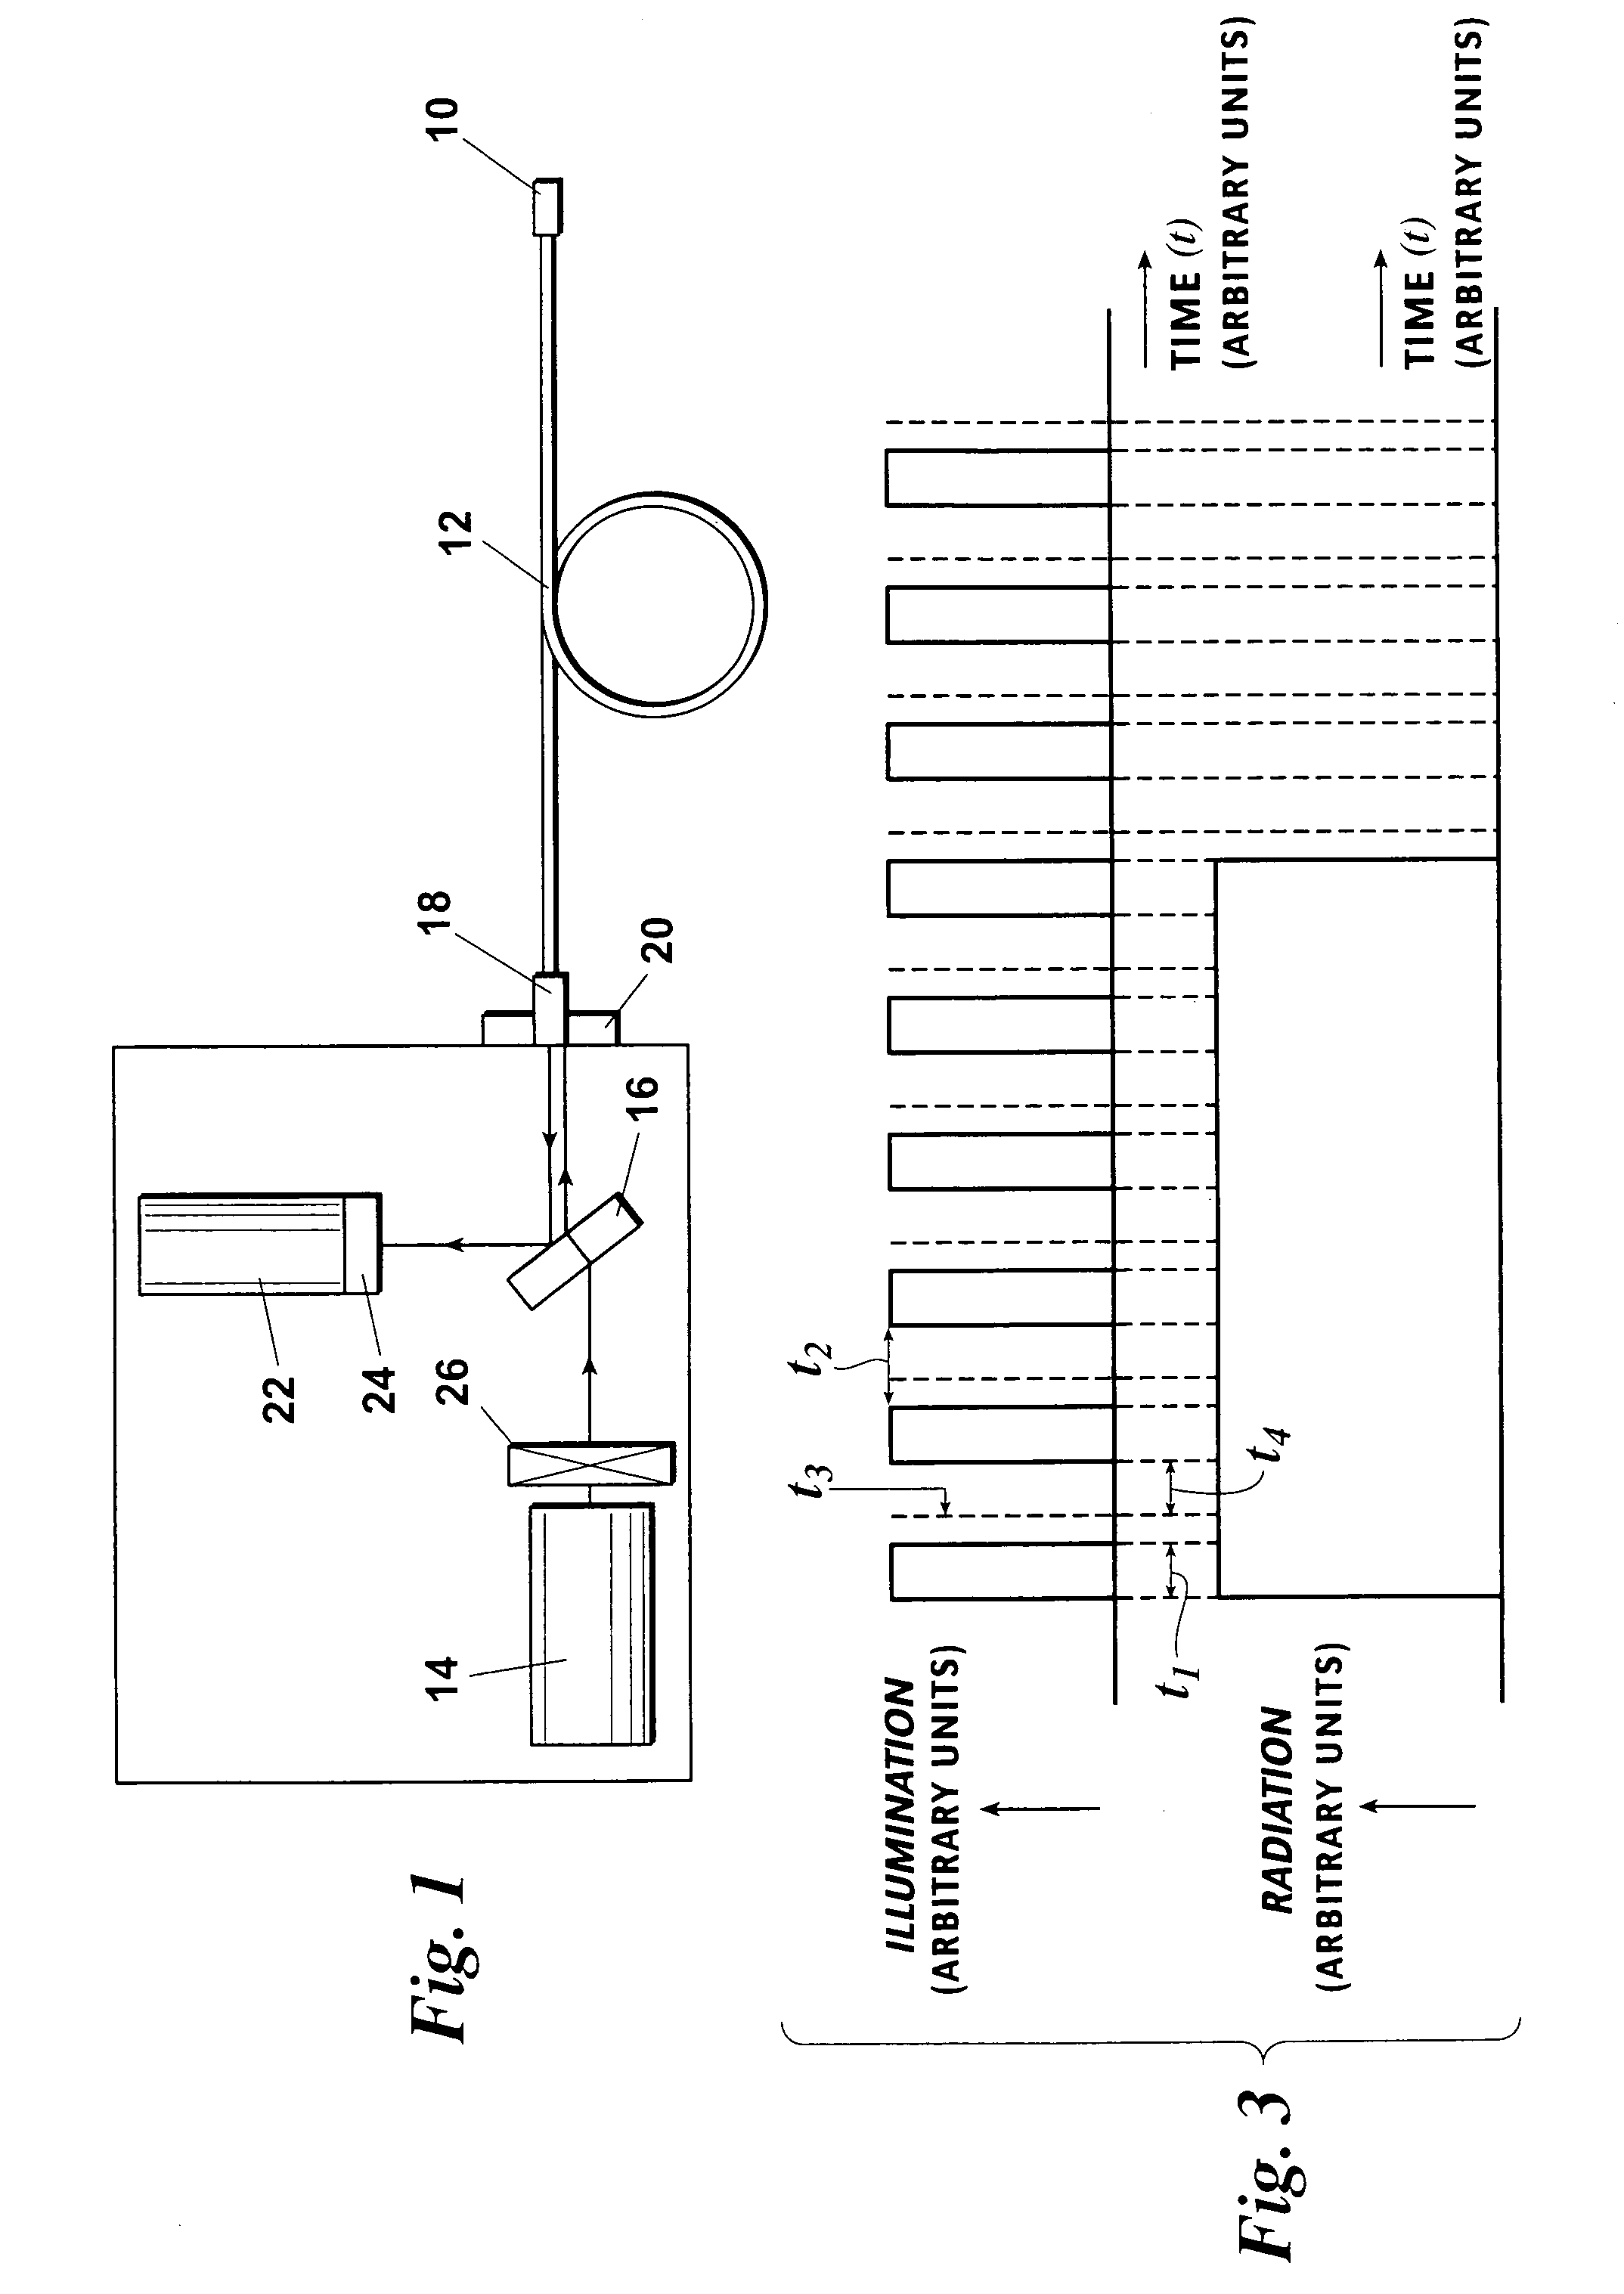 Optically stimulated luminescence radiation dosimetry method to determine integrated doses and dose rates and a method to extend the upper limit of measureable absorbed radiation doses during irradiation